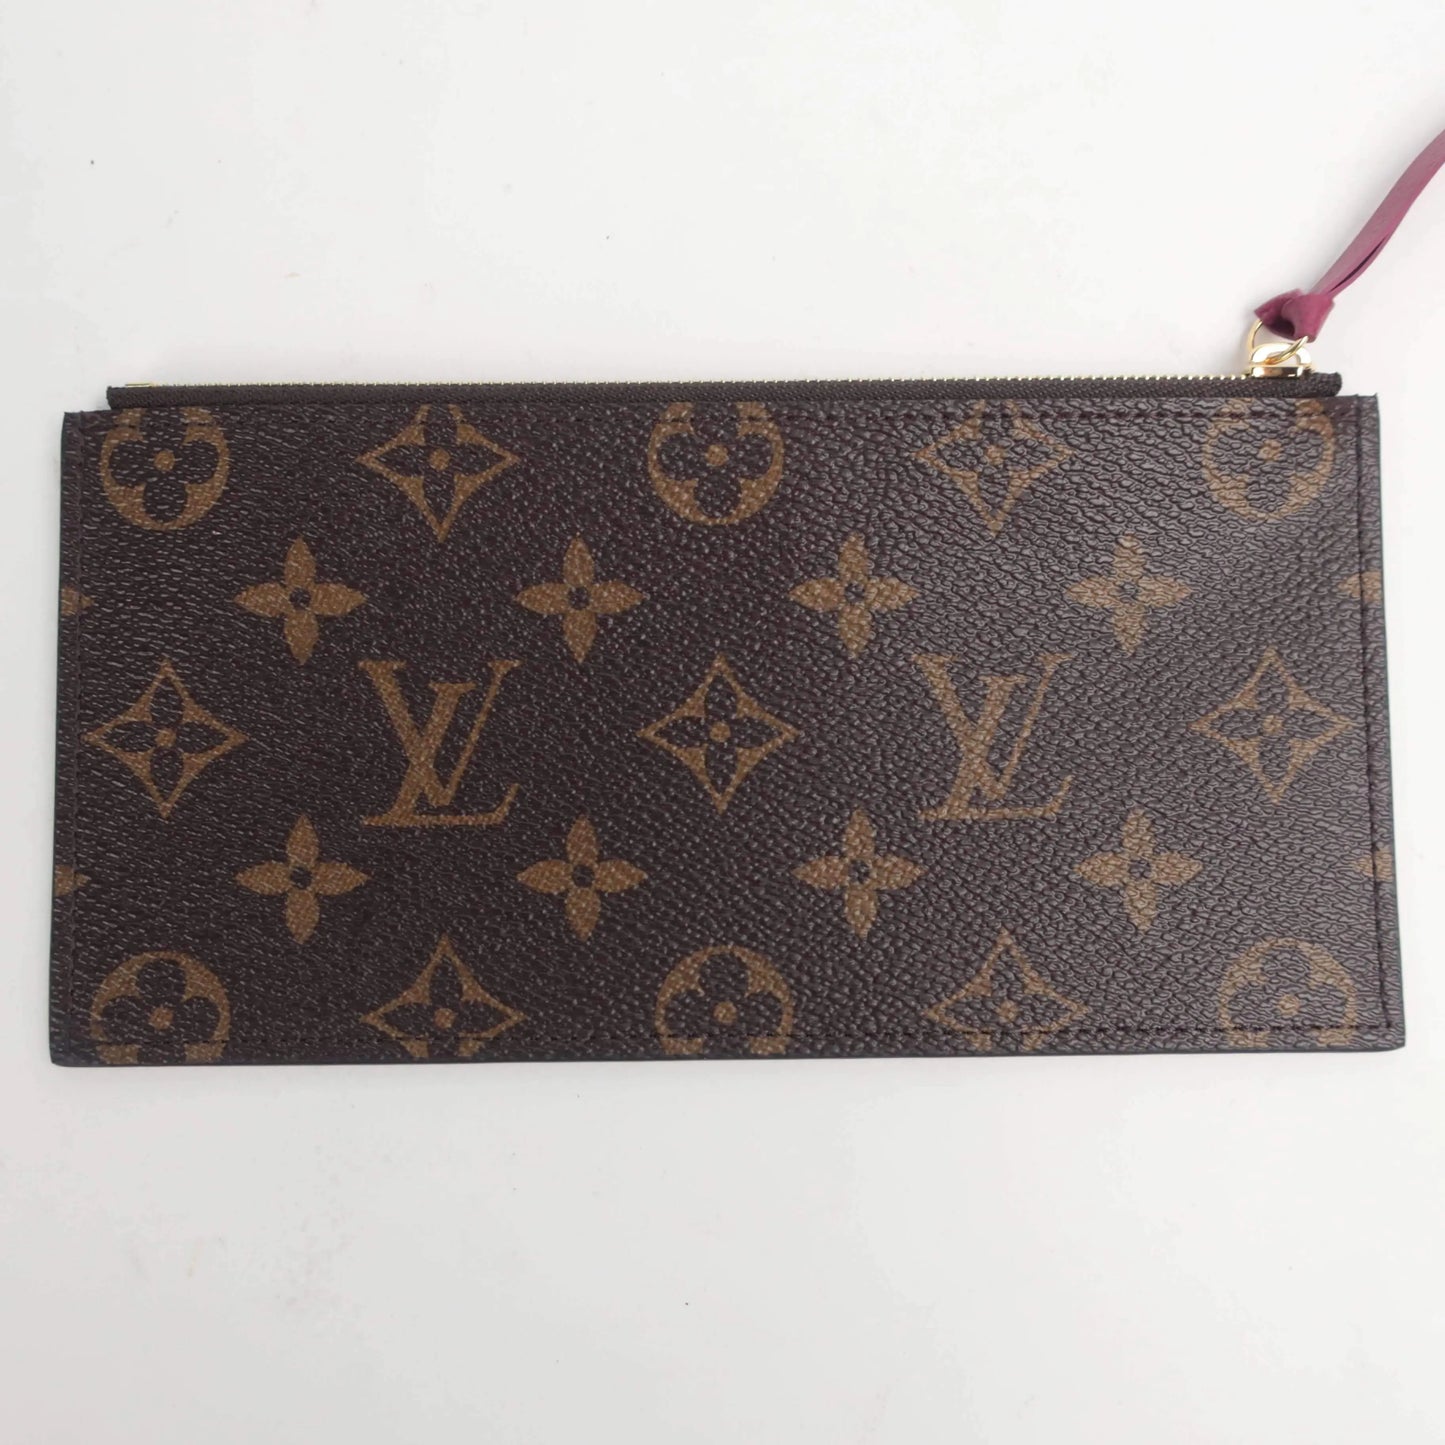 Load image into Gallery viewer, Louis Vuitton Louis Vuitton Monogram Felicie bag with Fuchsia Inserts LVBagaholic
